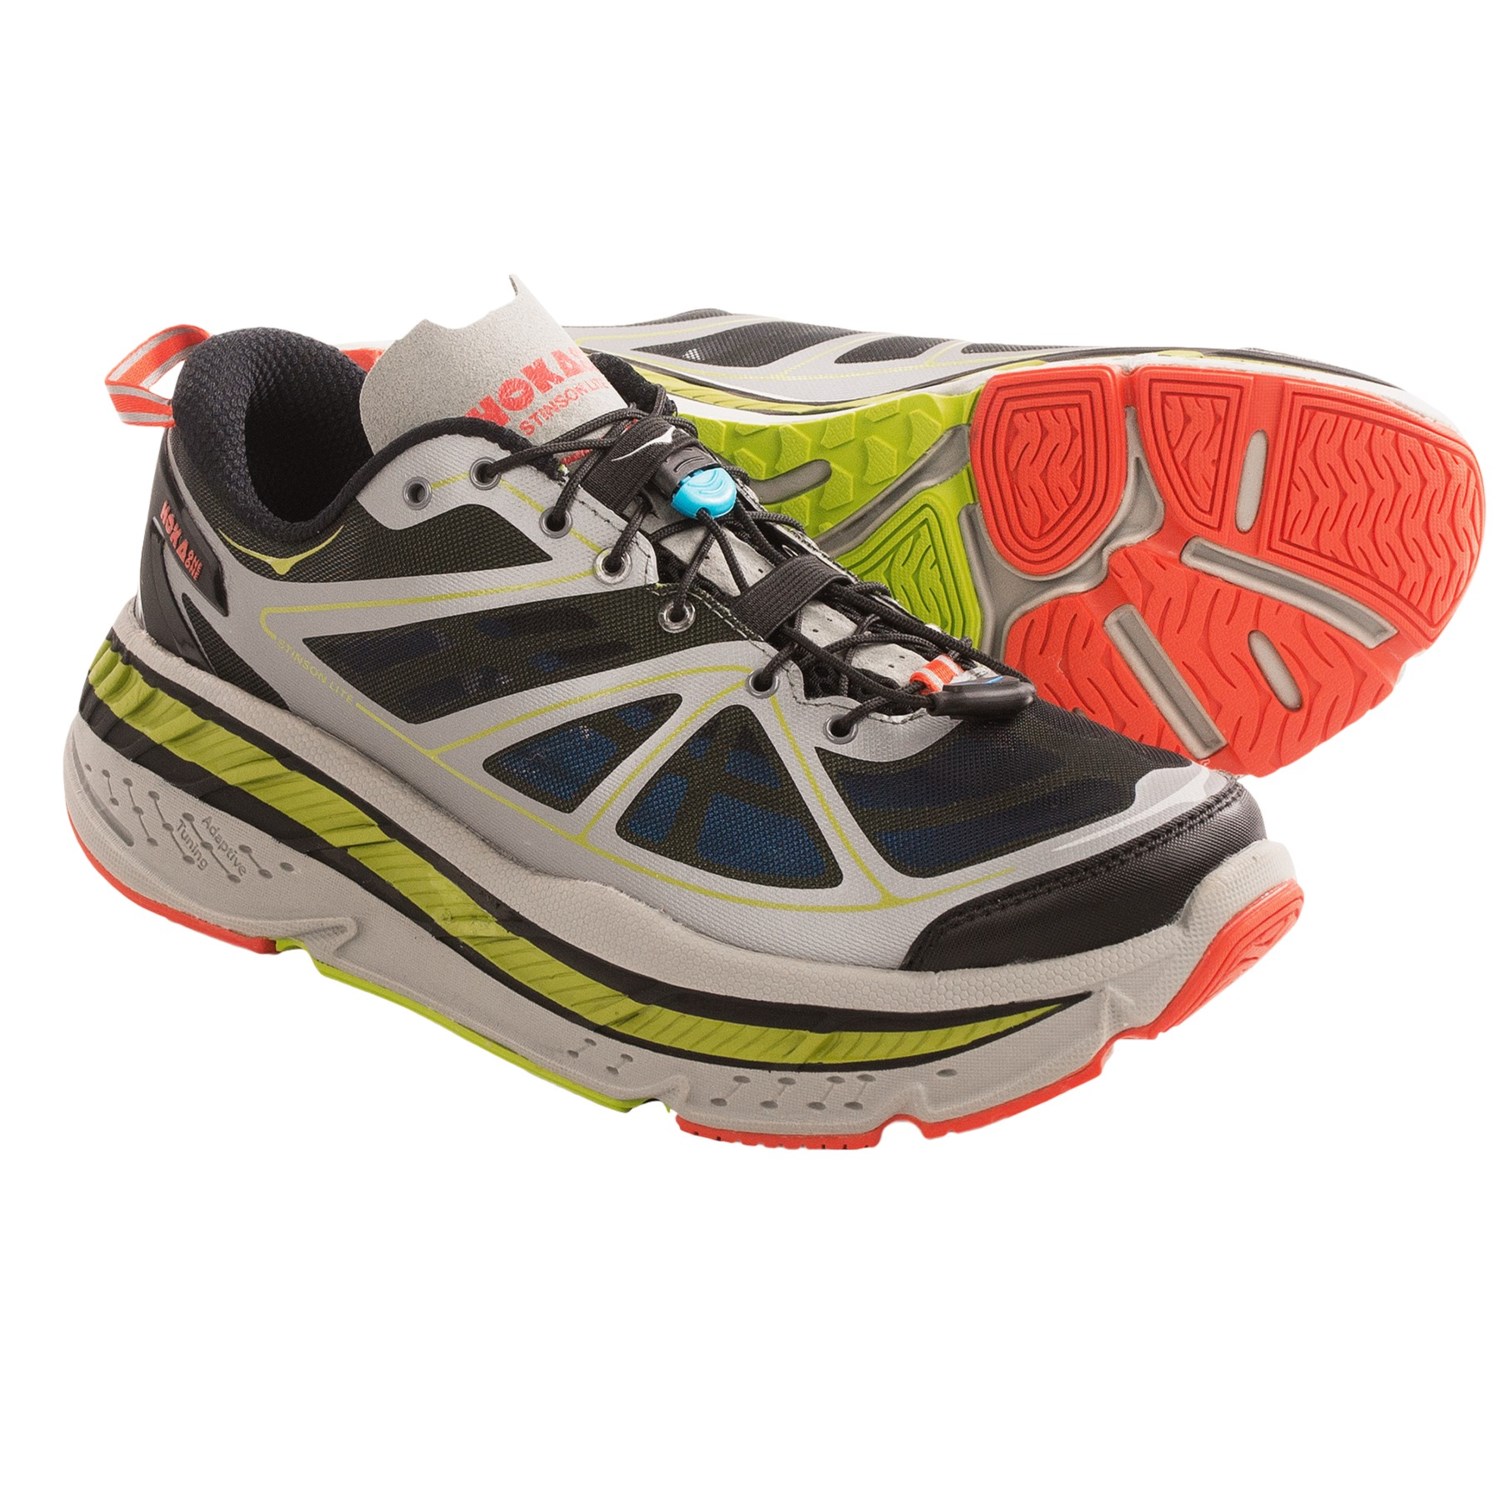 Hoka One One Stinson Lite Road Running Shoes (For Men) - Save 27%